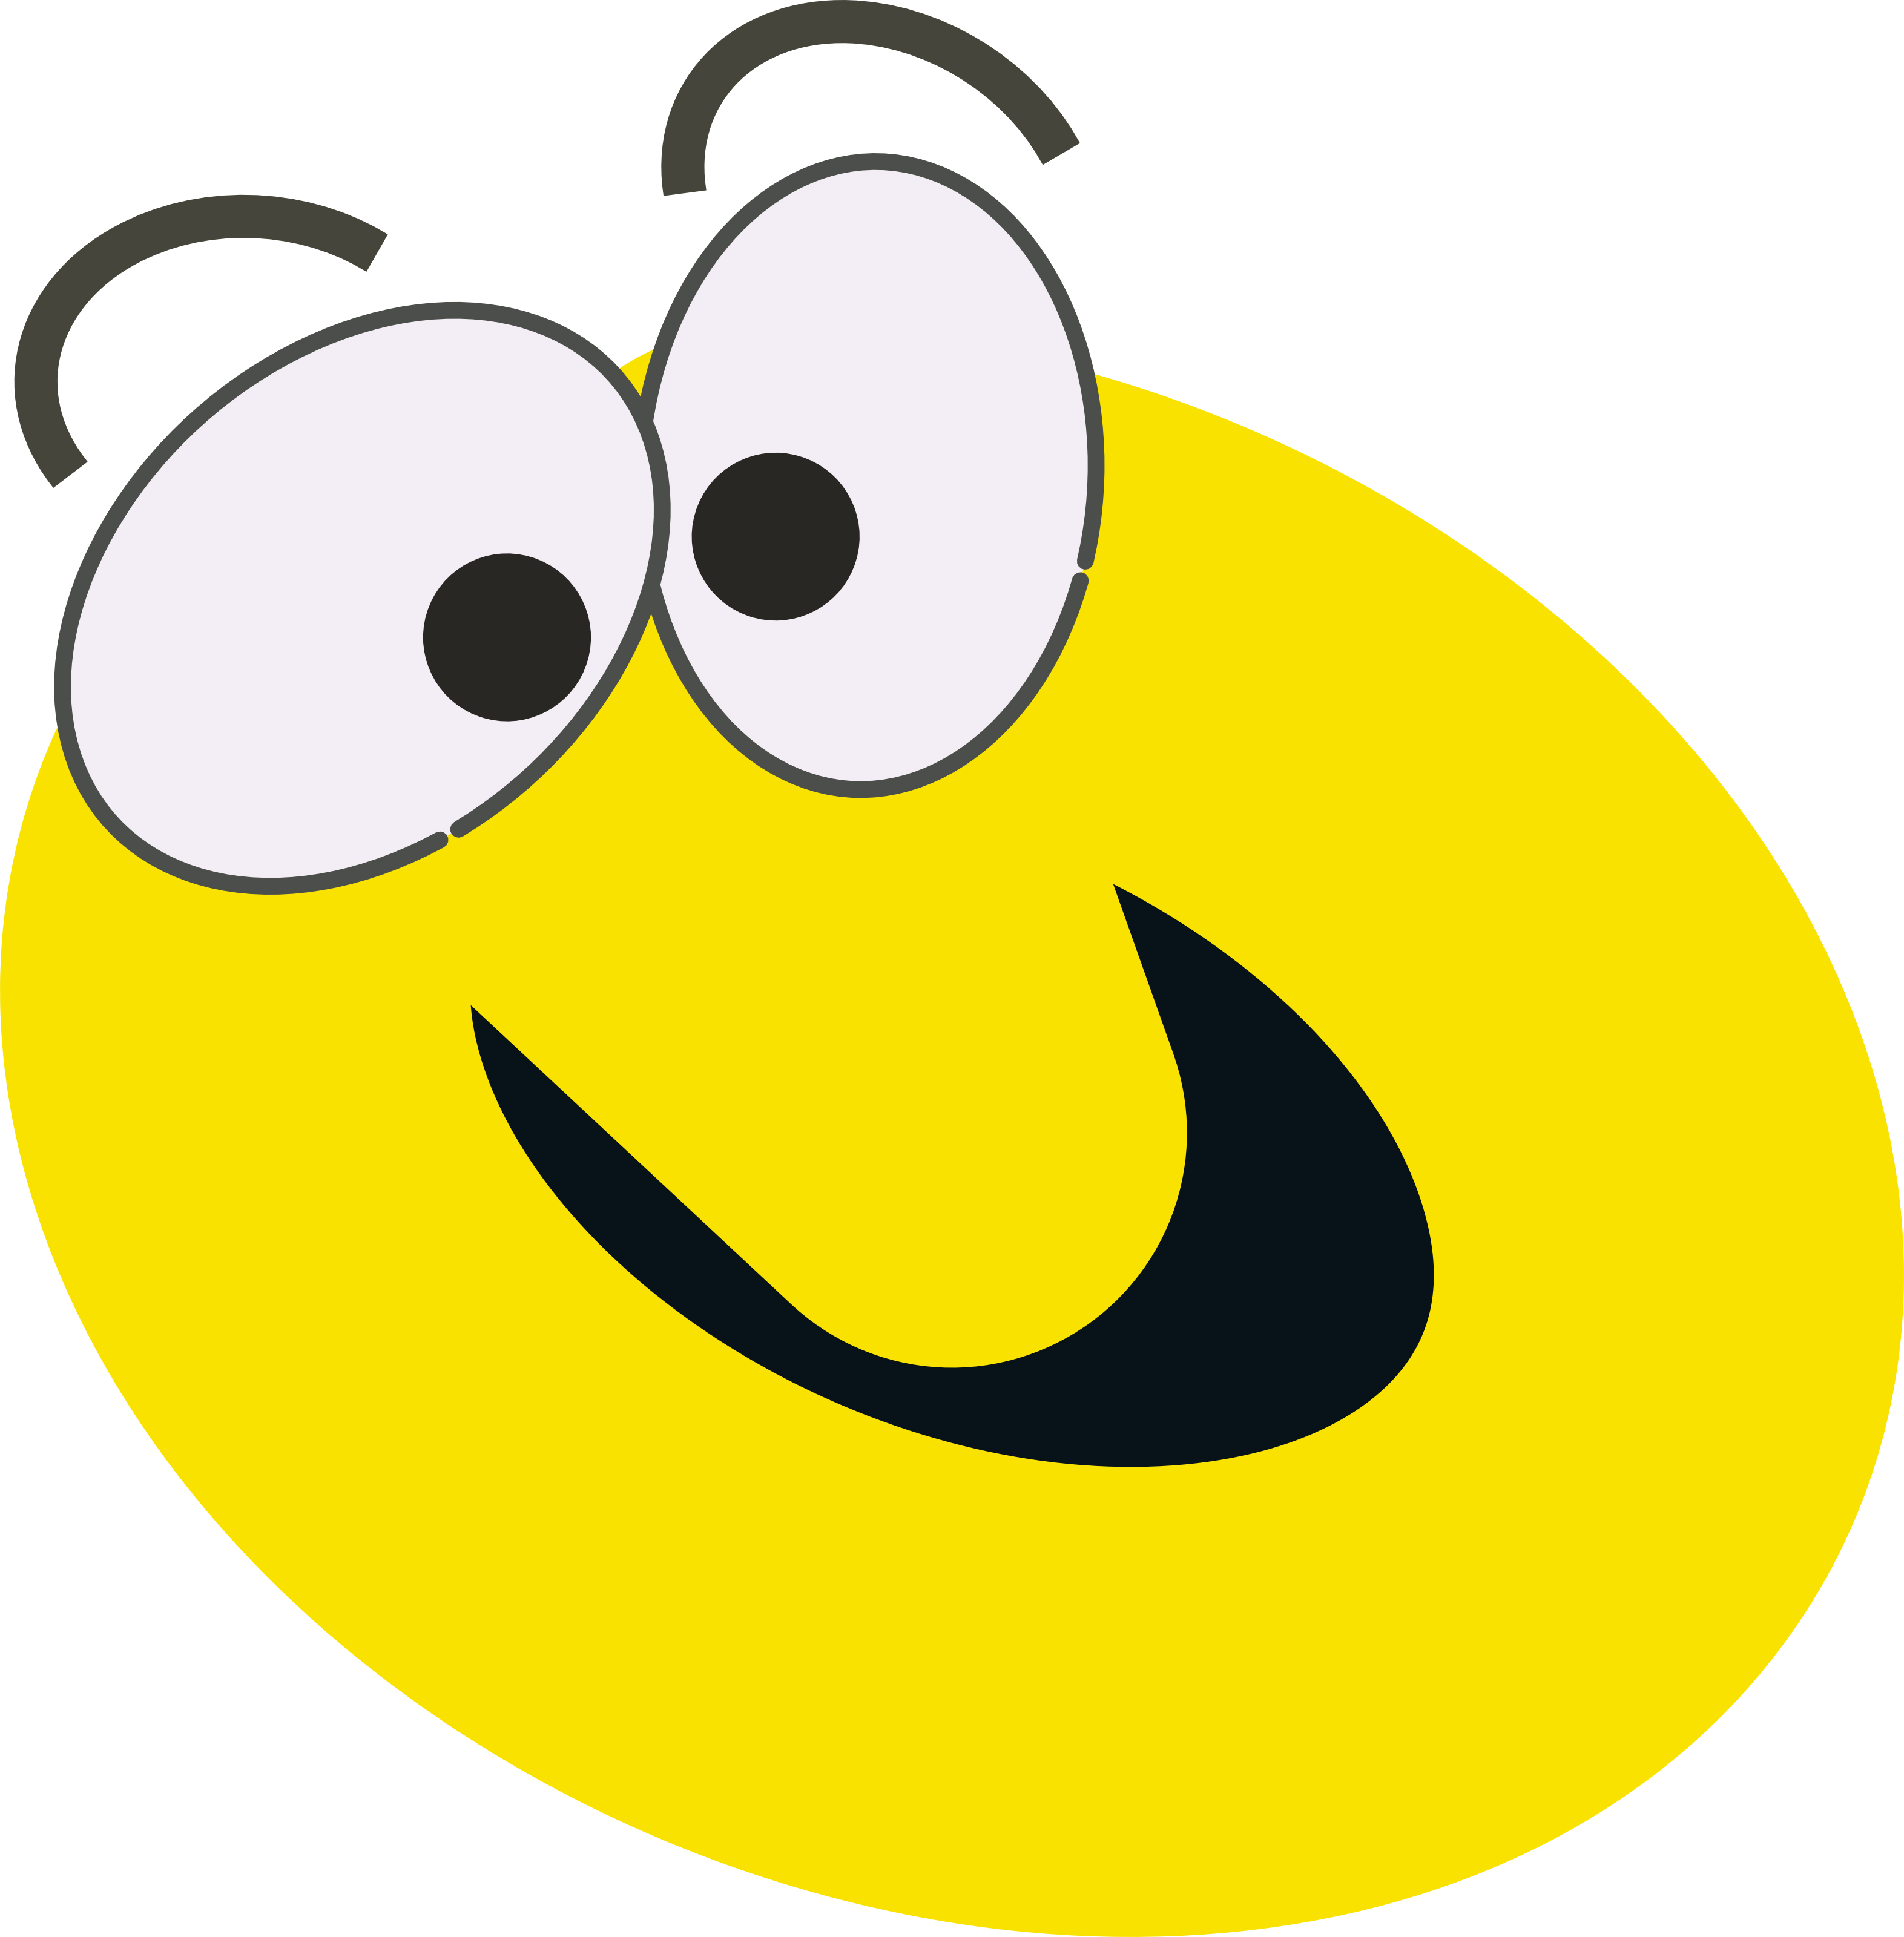 Laughing Smiley Face Clip Art | Clipart Panda - Free Clipart Images